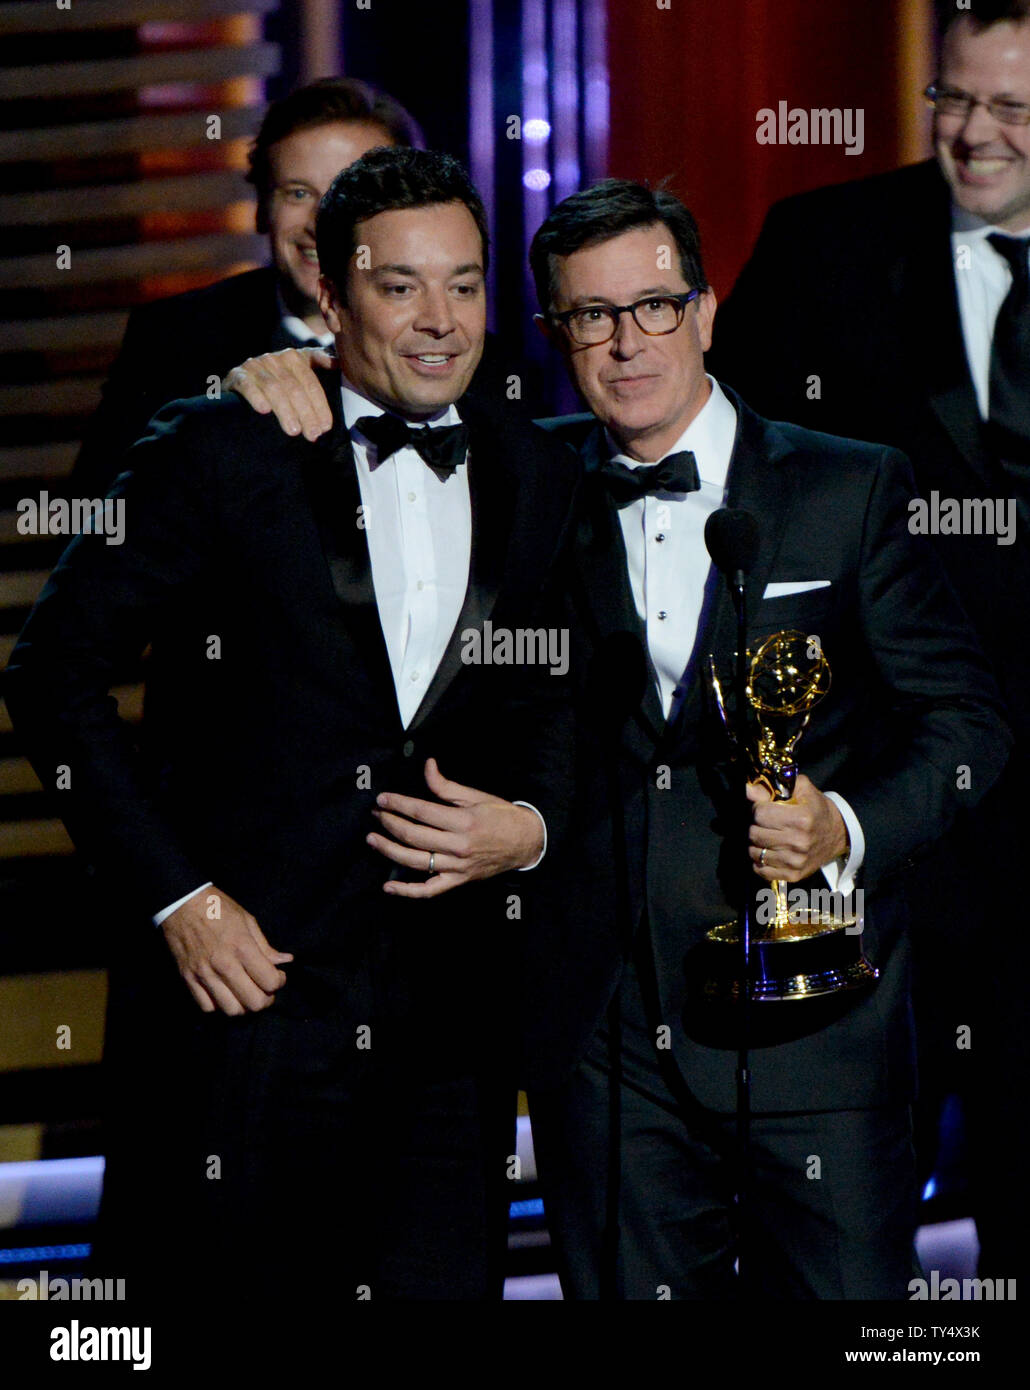 Jimmy Fallon, left, is seen onstage while Stephen Colbert and the producers of 'The Colbert Report' accept the award for outstanding variety series during the Primetime Emmy Awards at the Nokia Theatre in Los Angeles on August 25, 2014.     UPI/Pat Benic Stock Photo